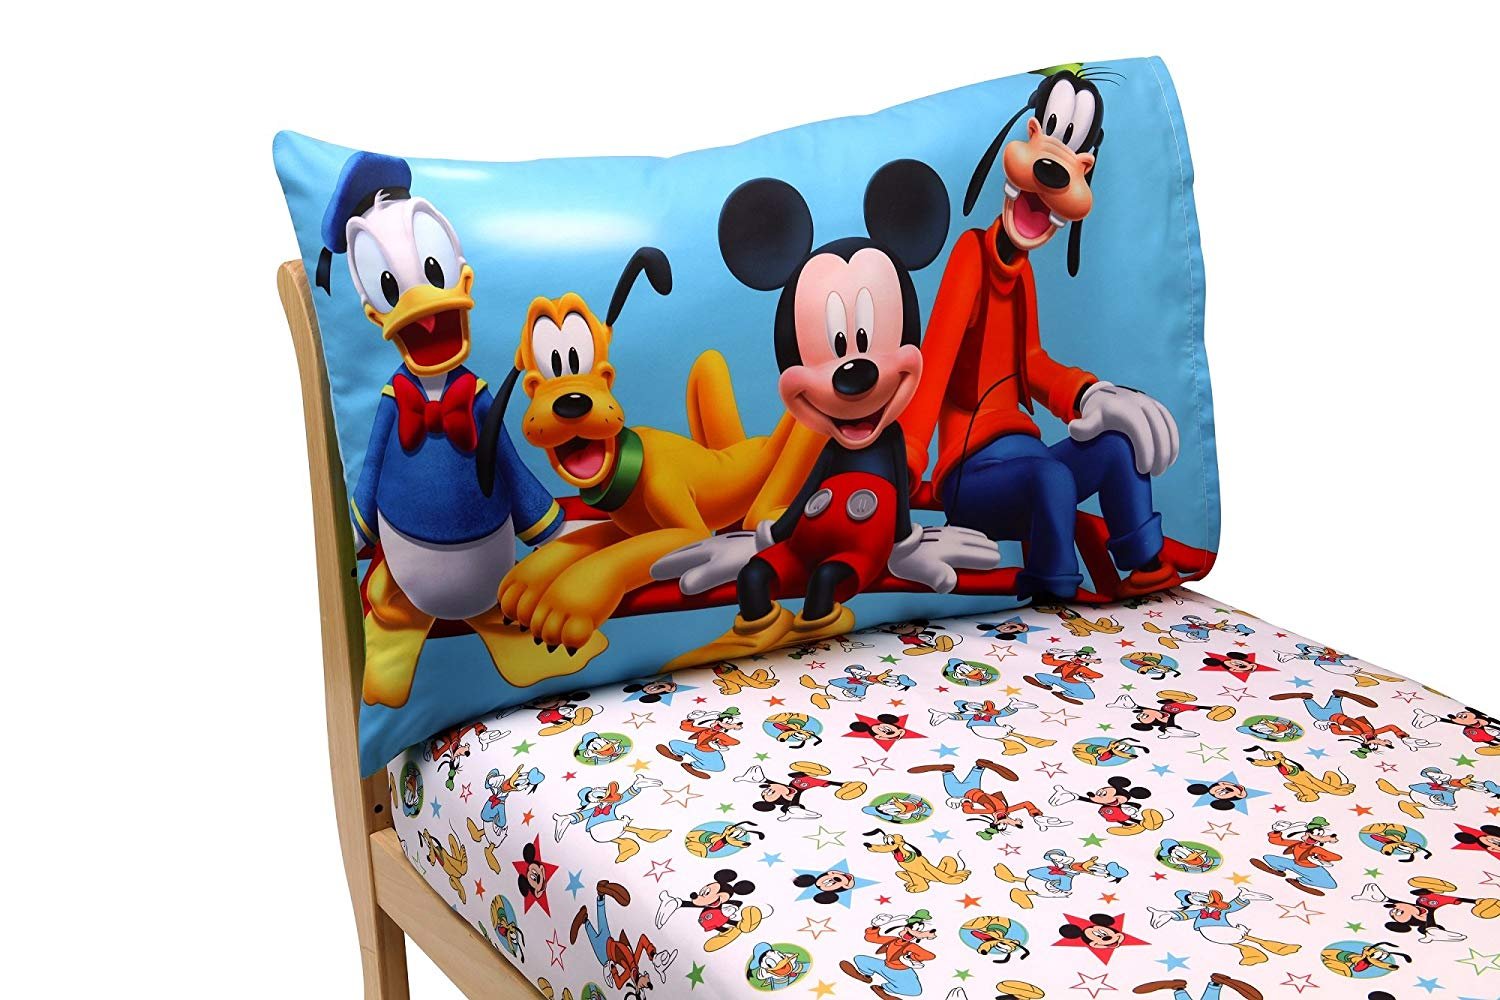 Disney Mickey Mouse Clubhouse Toddler Sheet Set - image 3 of 5